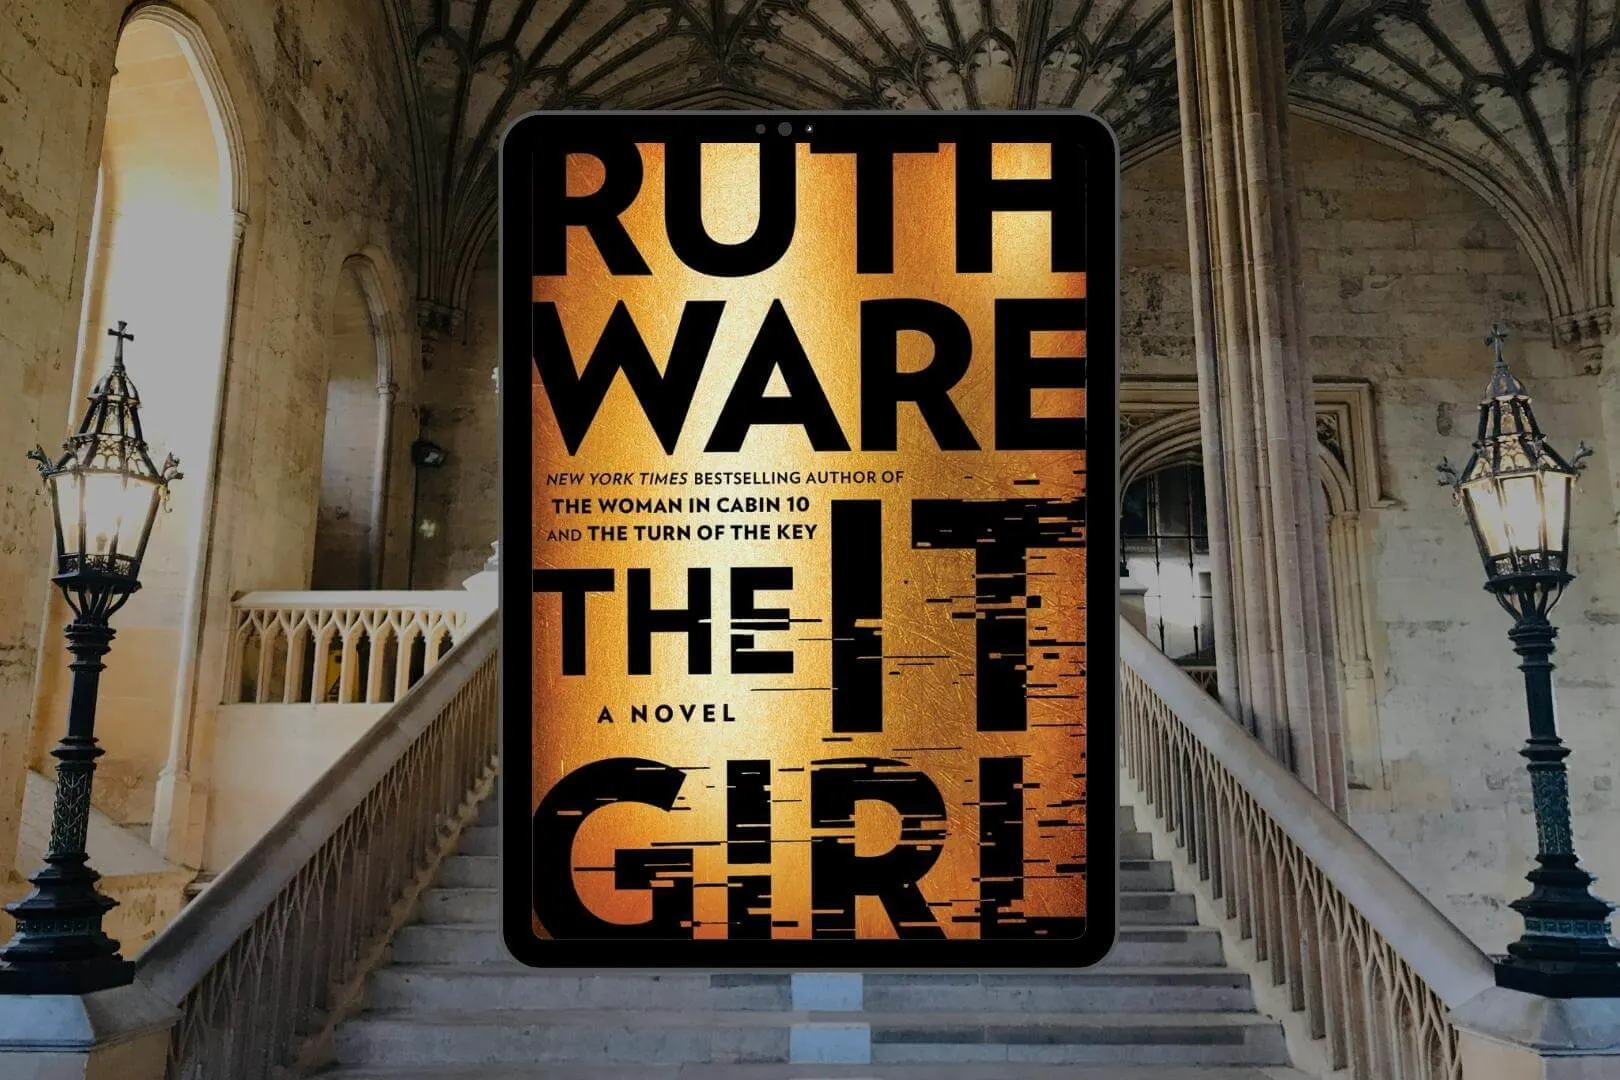 Conqueror To disable Frank Review: The It Girl by Ruth Ware - Book Club Chat